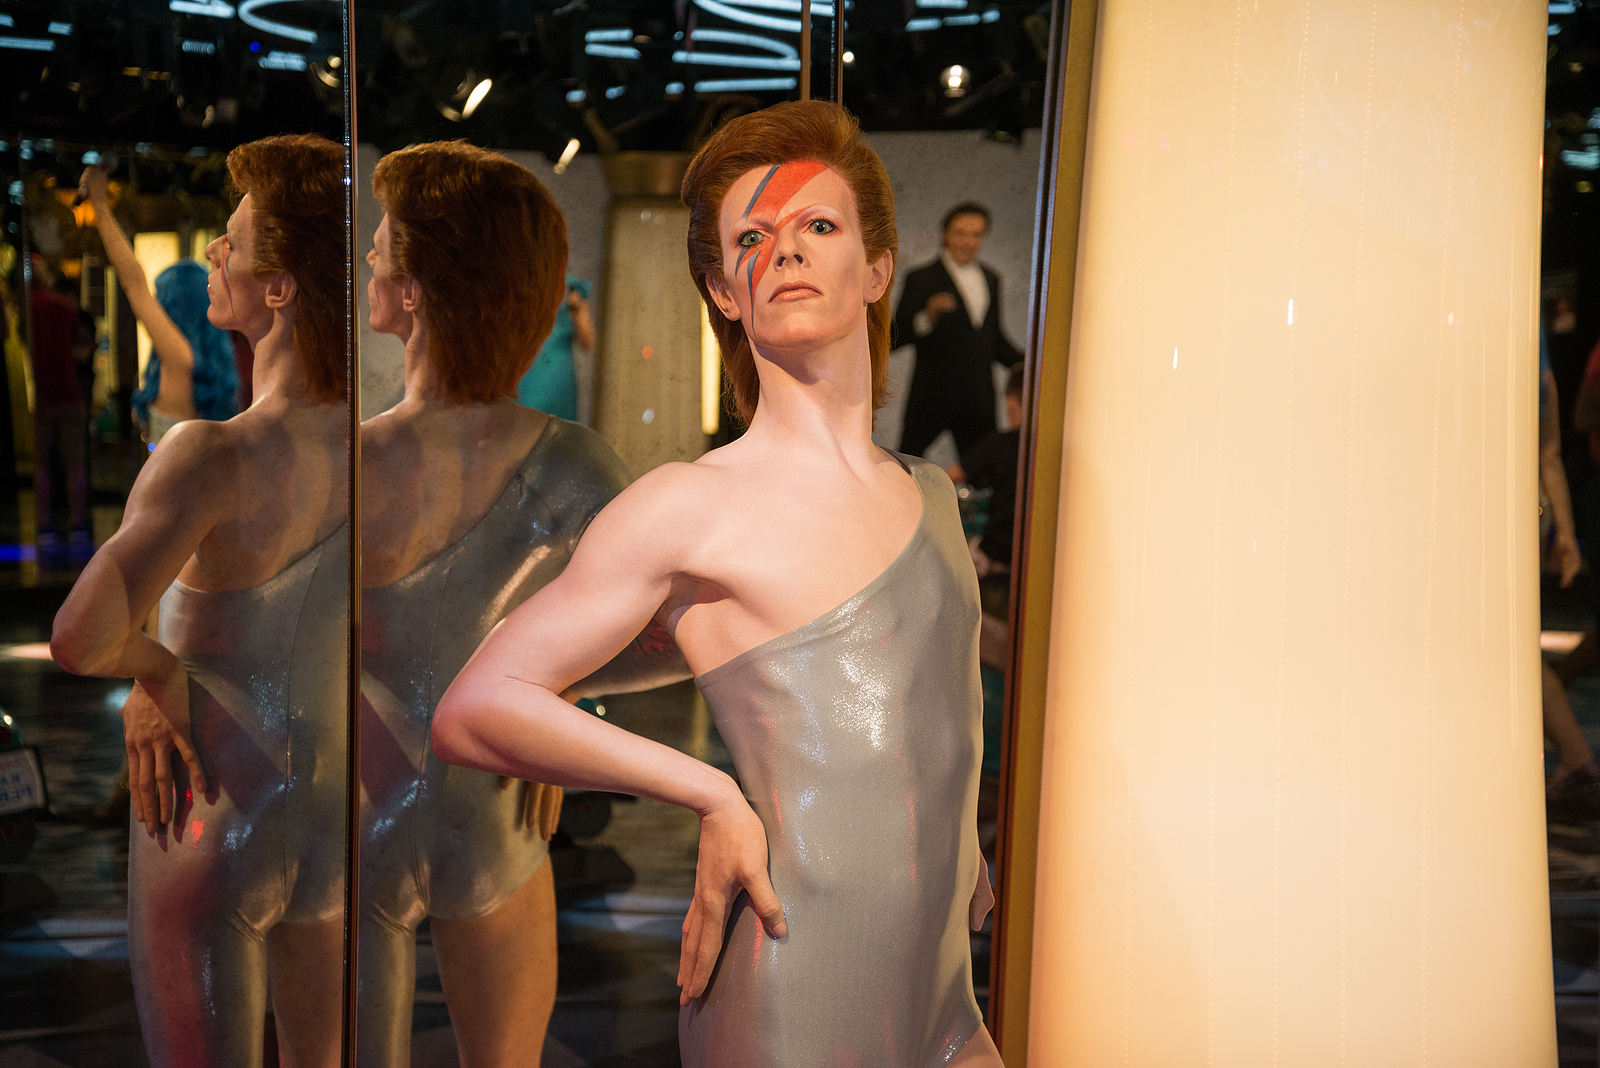 David Bowie as his alter ego persona, wearing a tight dancer's clothing, posing in front of a mirror.